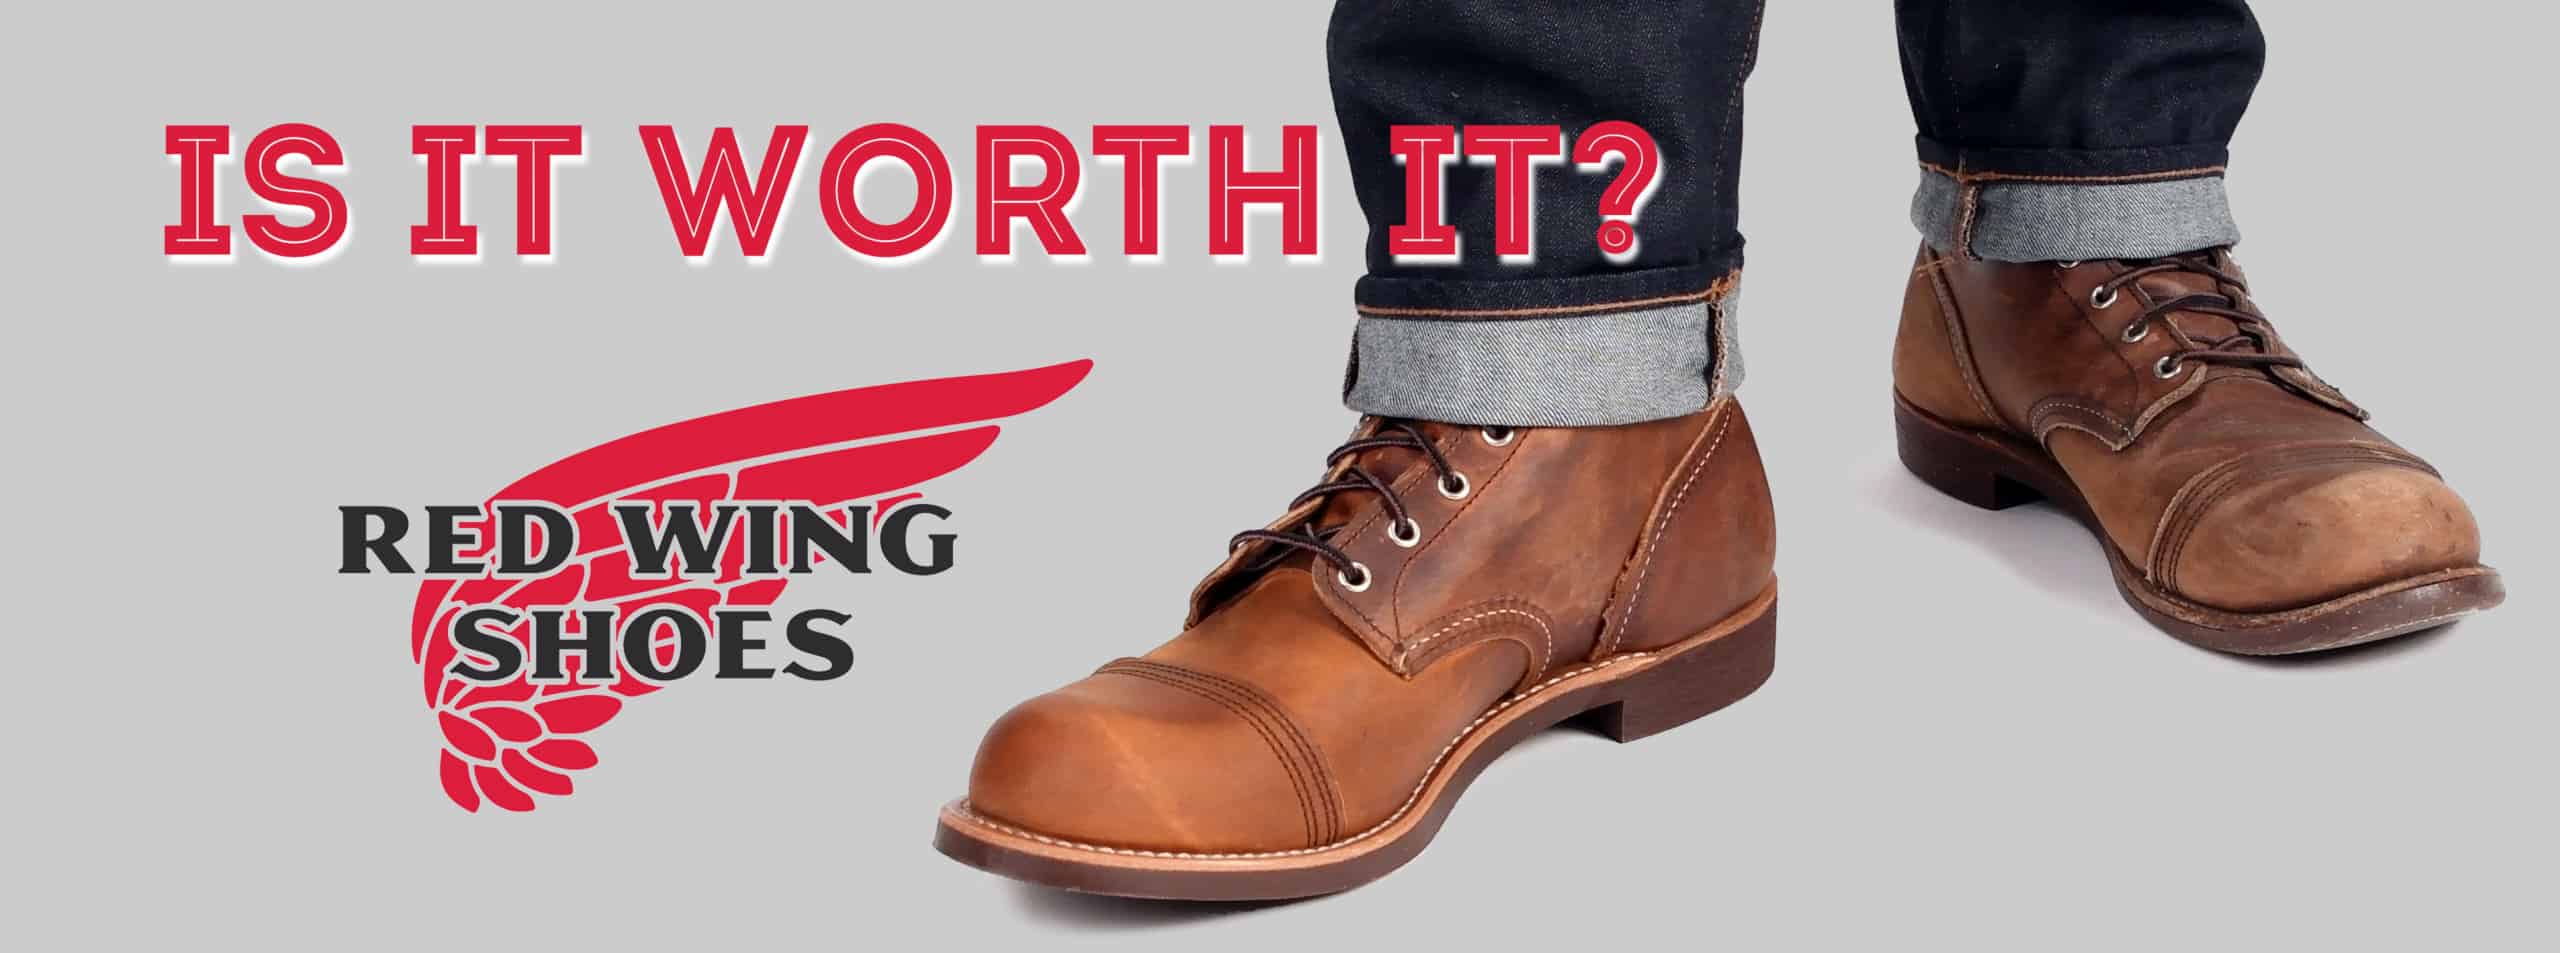 best made work boots in the world